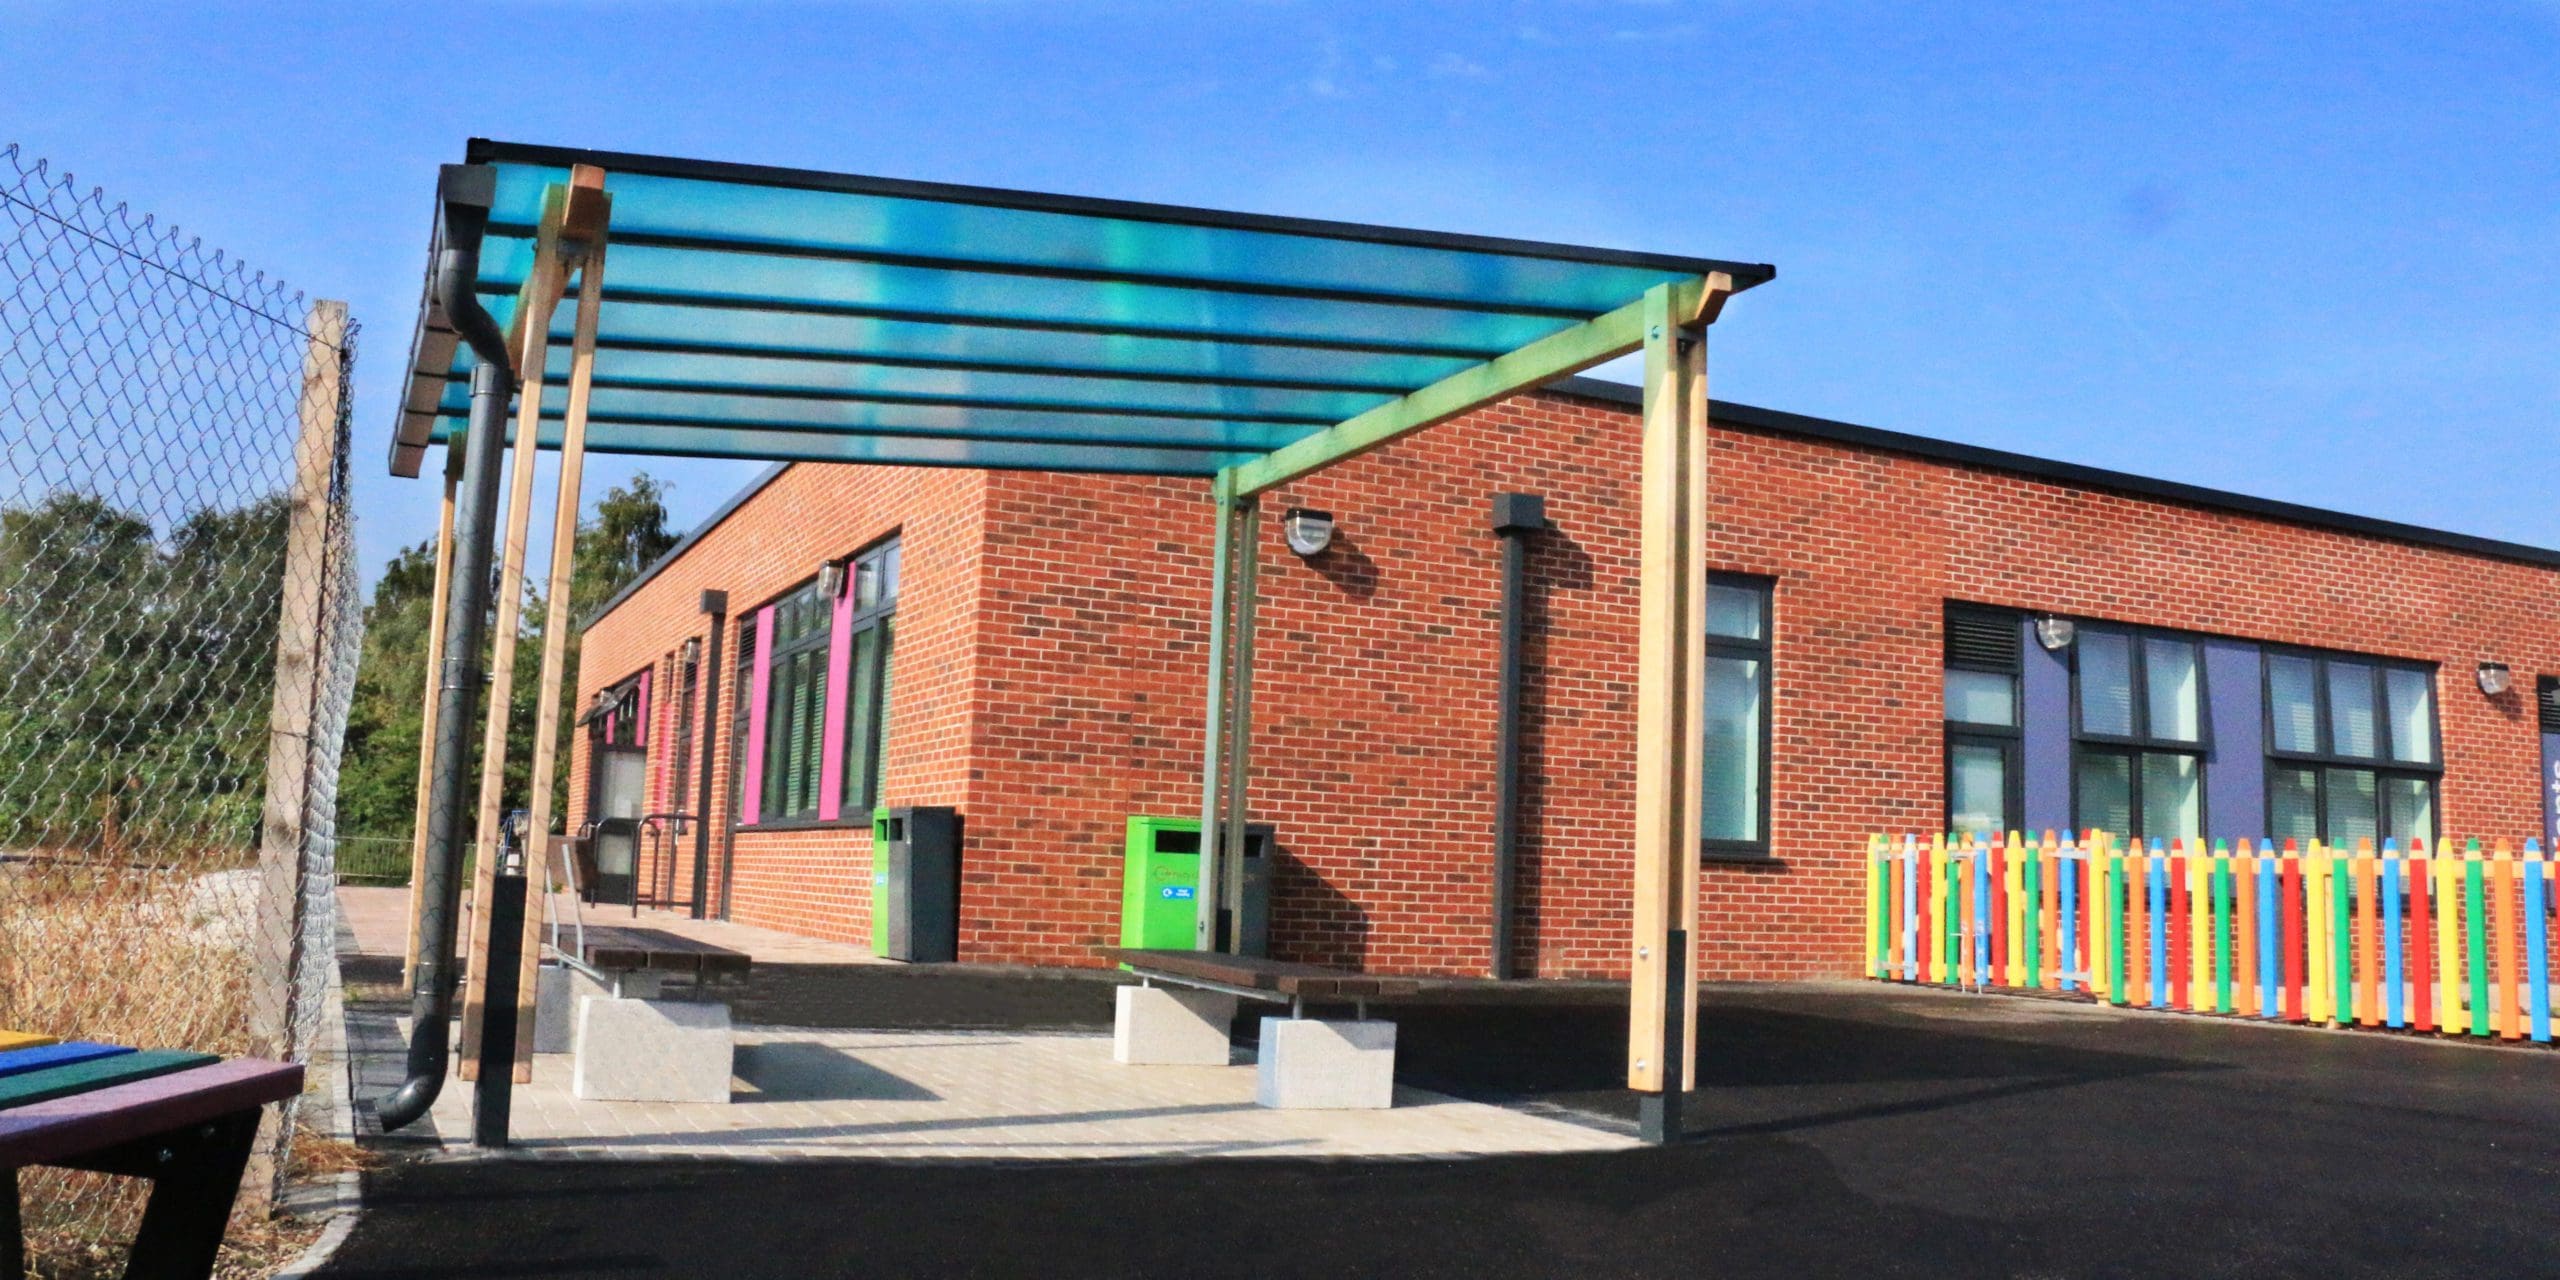 External pergola with blue tinted canopy colour infront of primary school